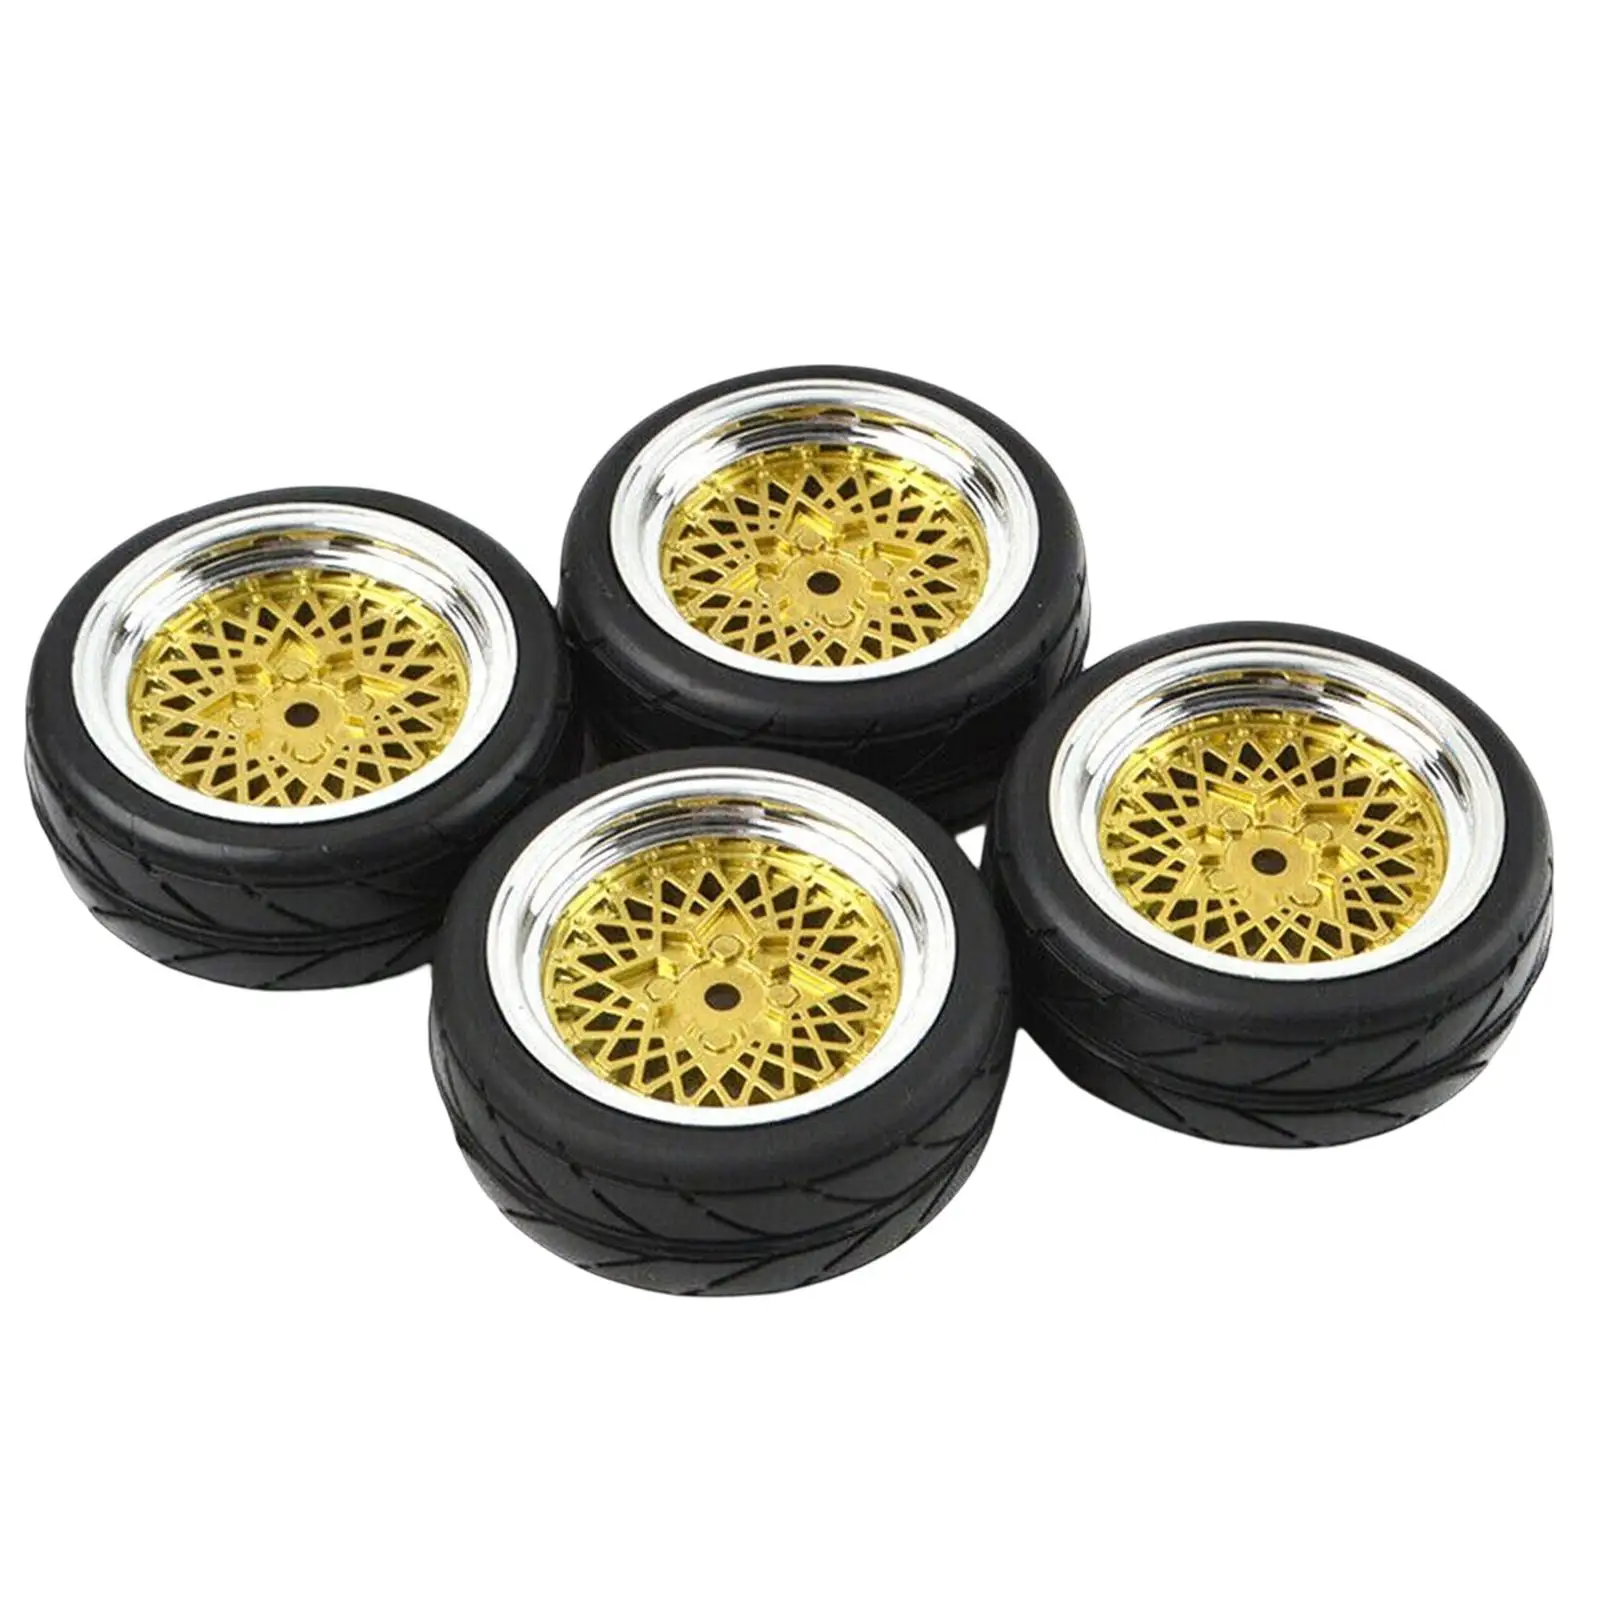 4Pcs 1:10 RC Wheel Rim and Tires Upgrade for HSP Remote Control Car Model Buggy Vehicles Trucks